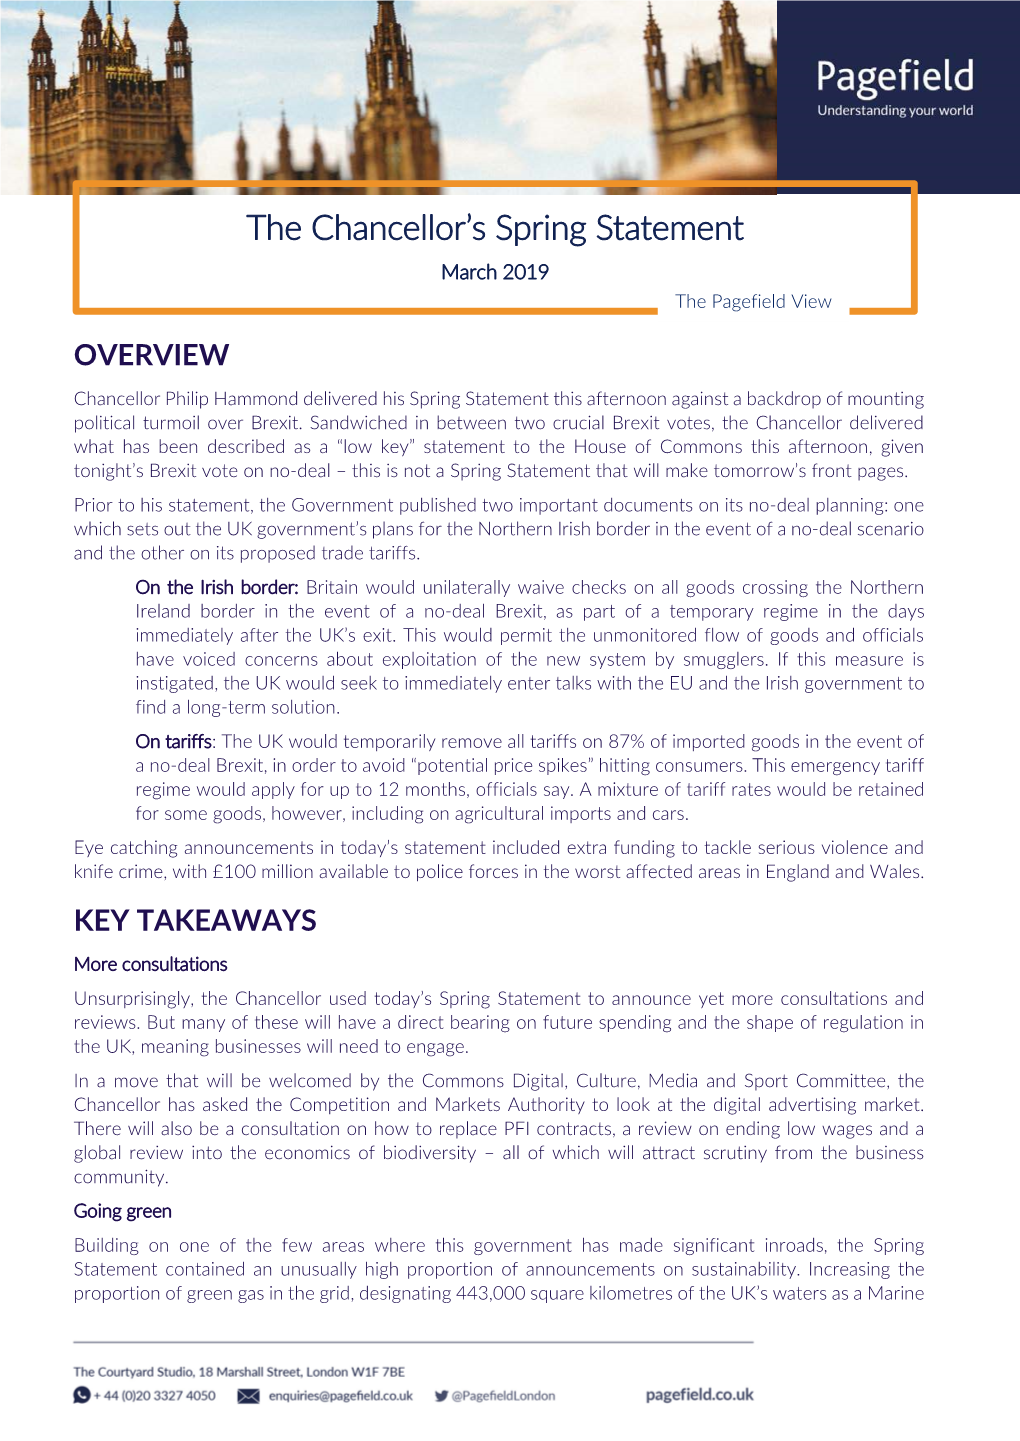 The Chancellor's Spring Statement